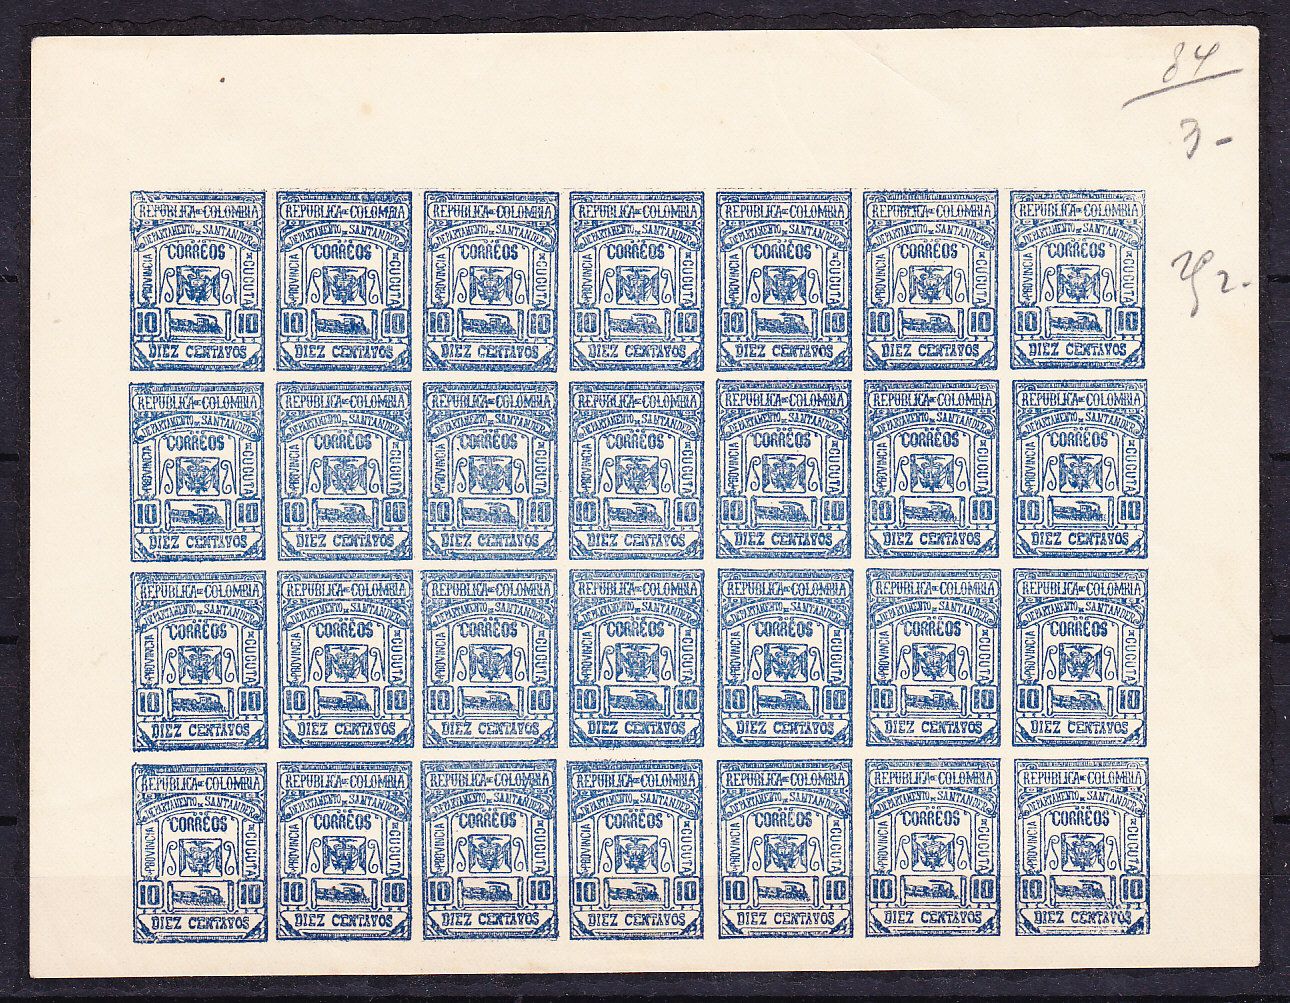 Colombia Santander City of Cucuta RARE Complete Sheet 10 Cent Unissued